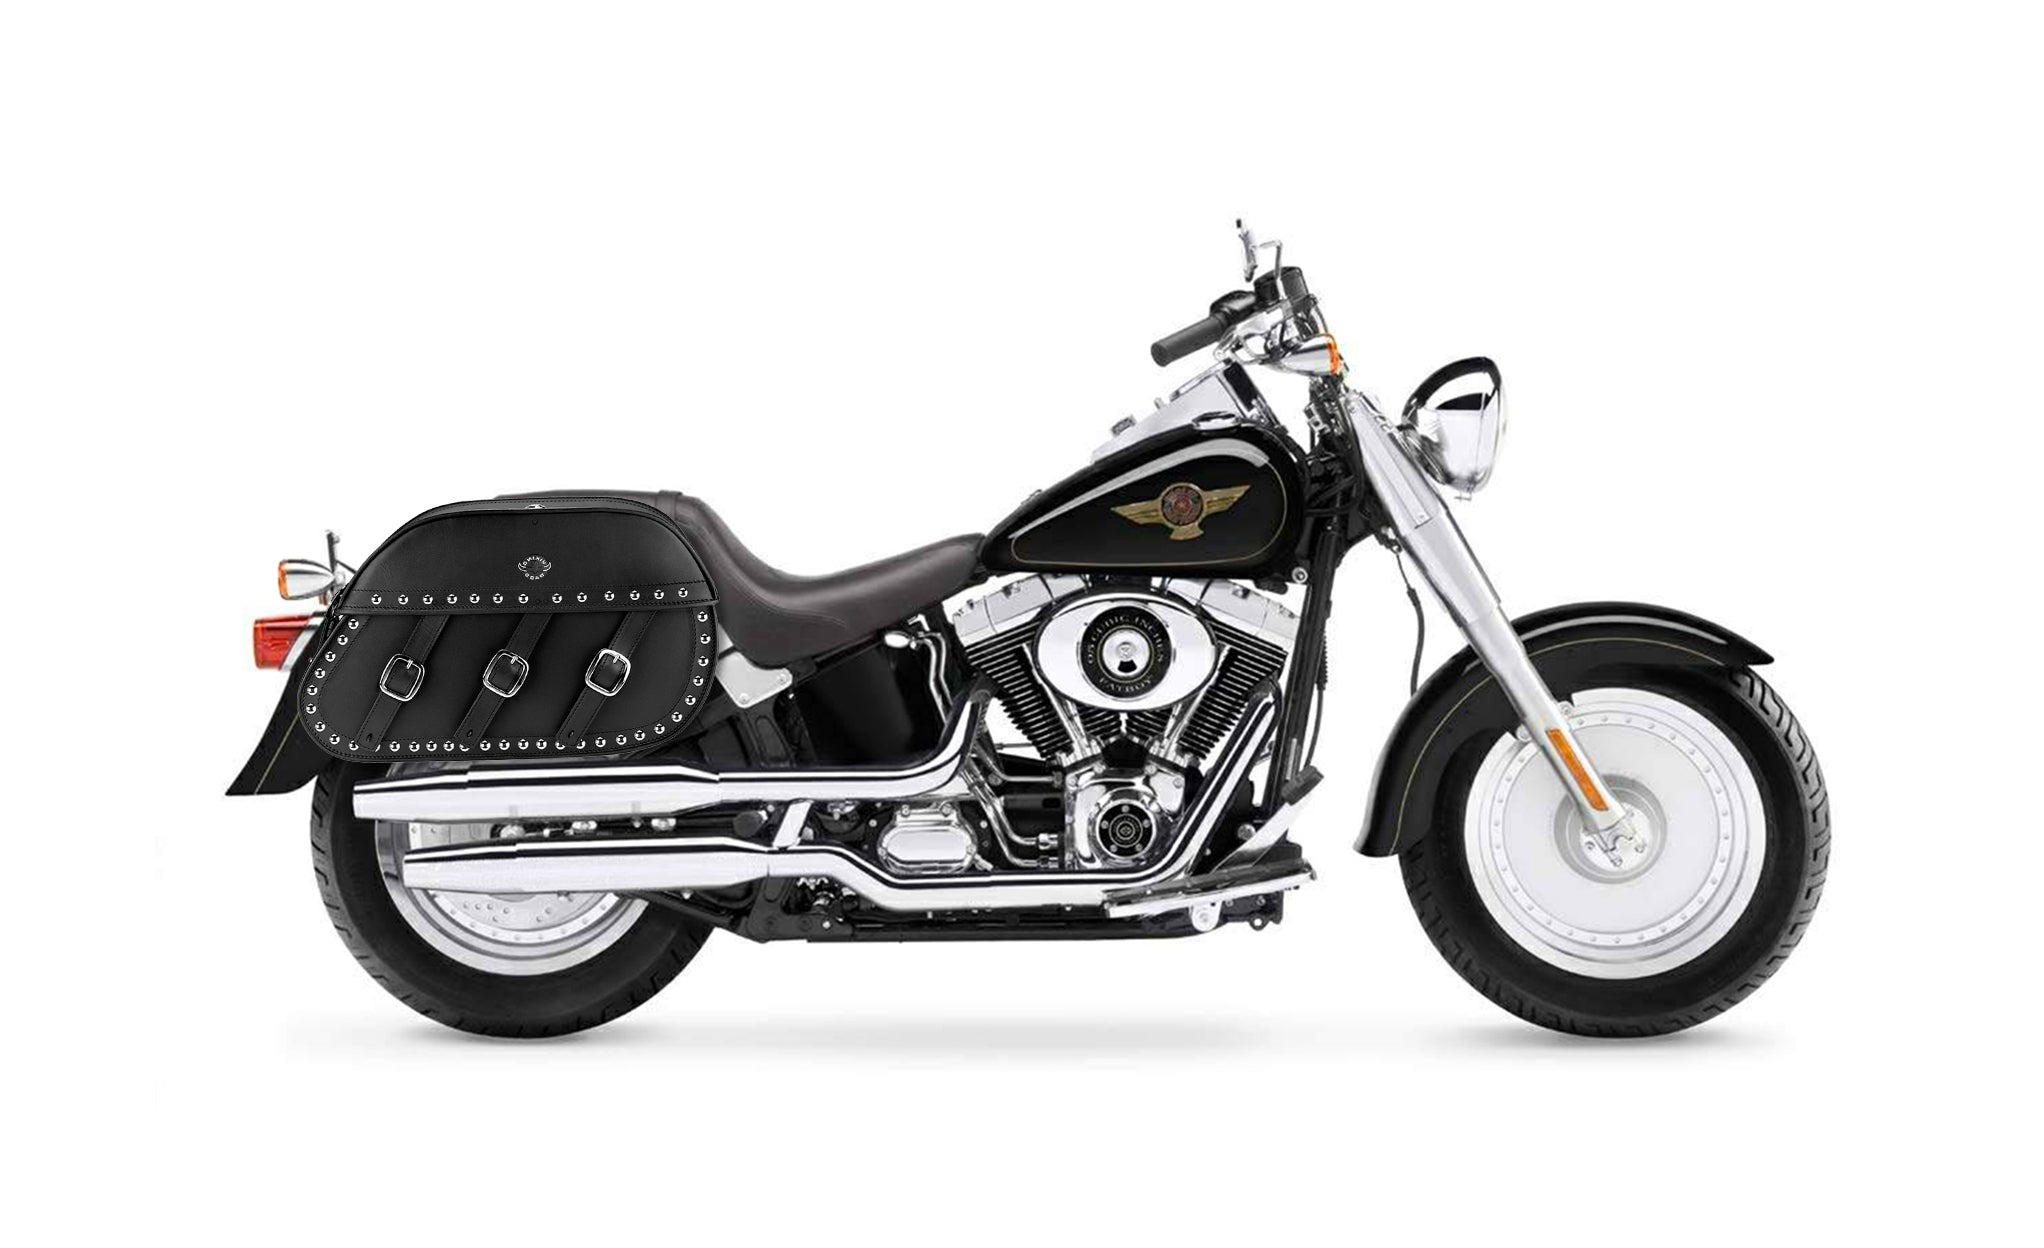 34L - Trianon Extra Large Studded Leather Motorcycle Saddlebags for Harley Softail Fatboy FLSTF/I on Bike Photo @expand